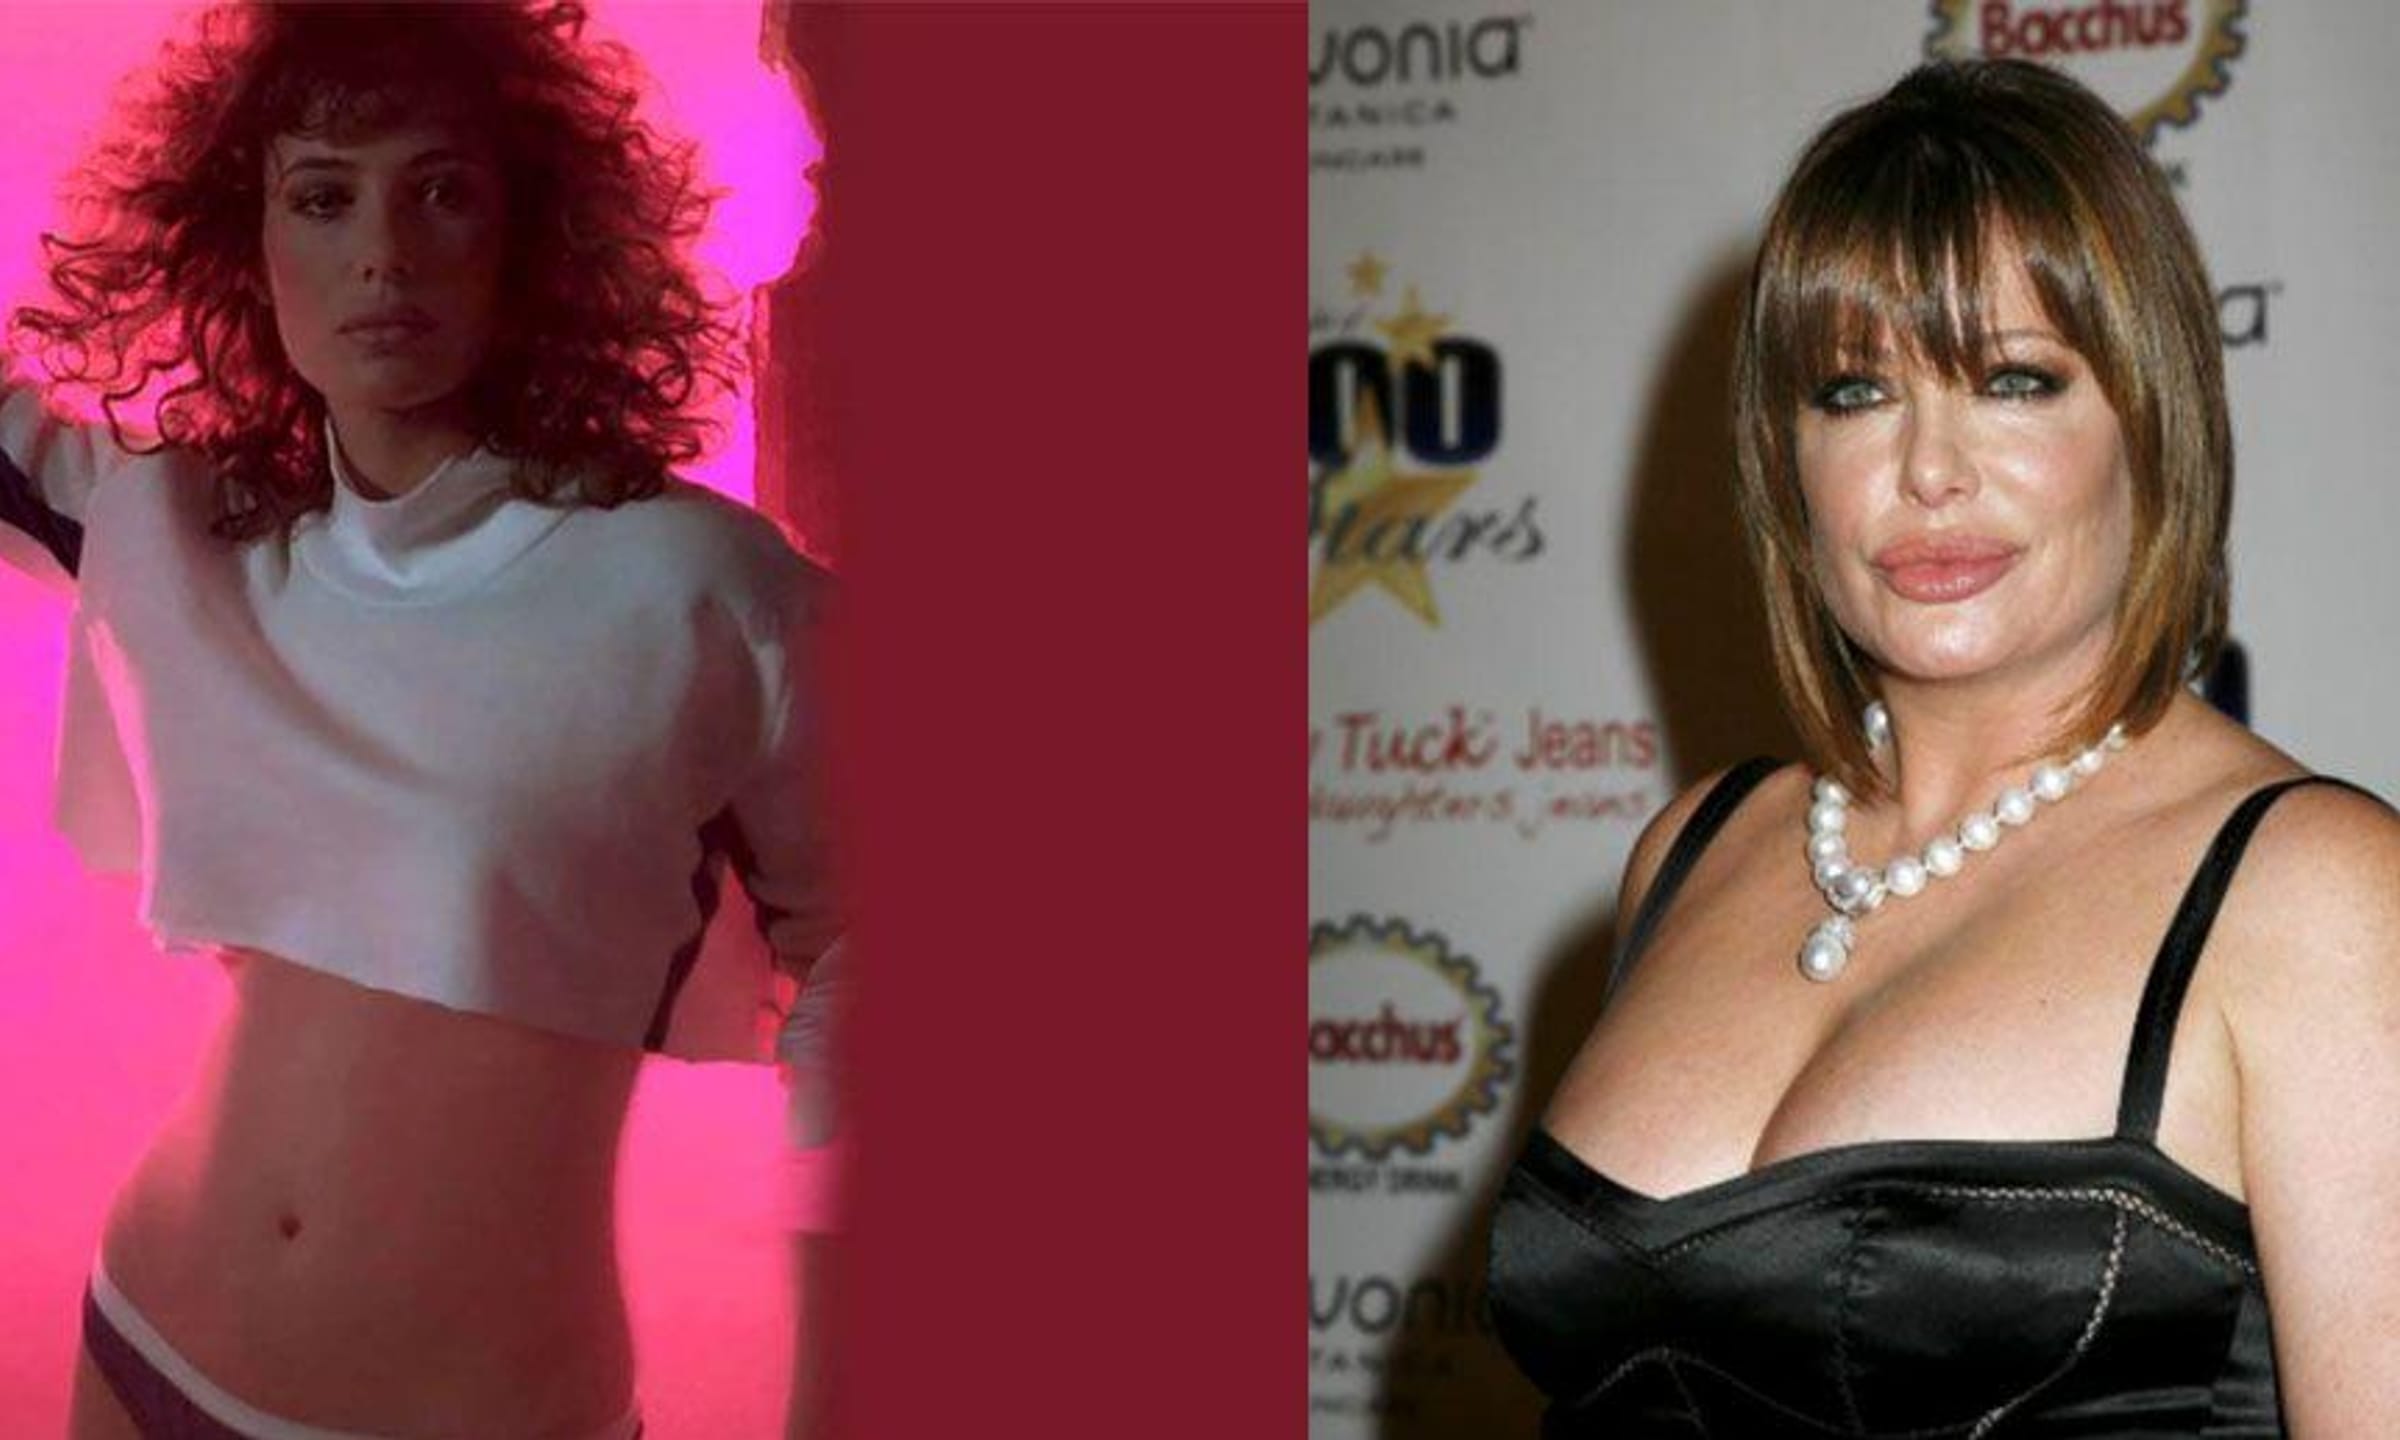 brian westlake recommends kelly lebrock hot pics pic